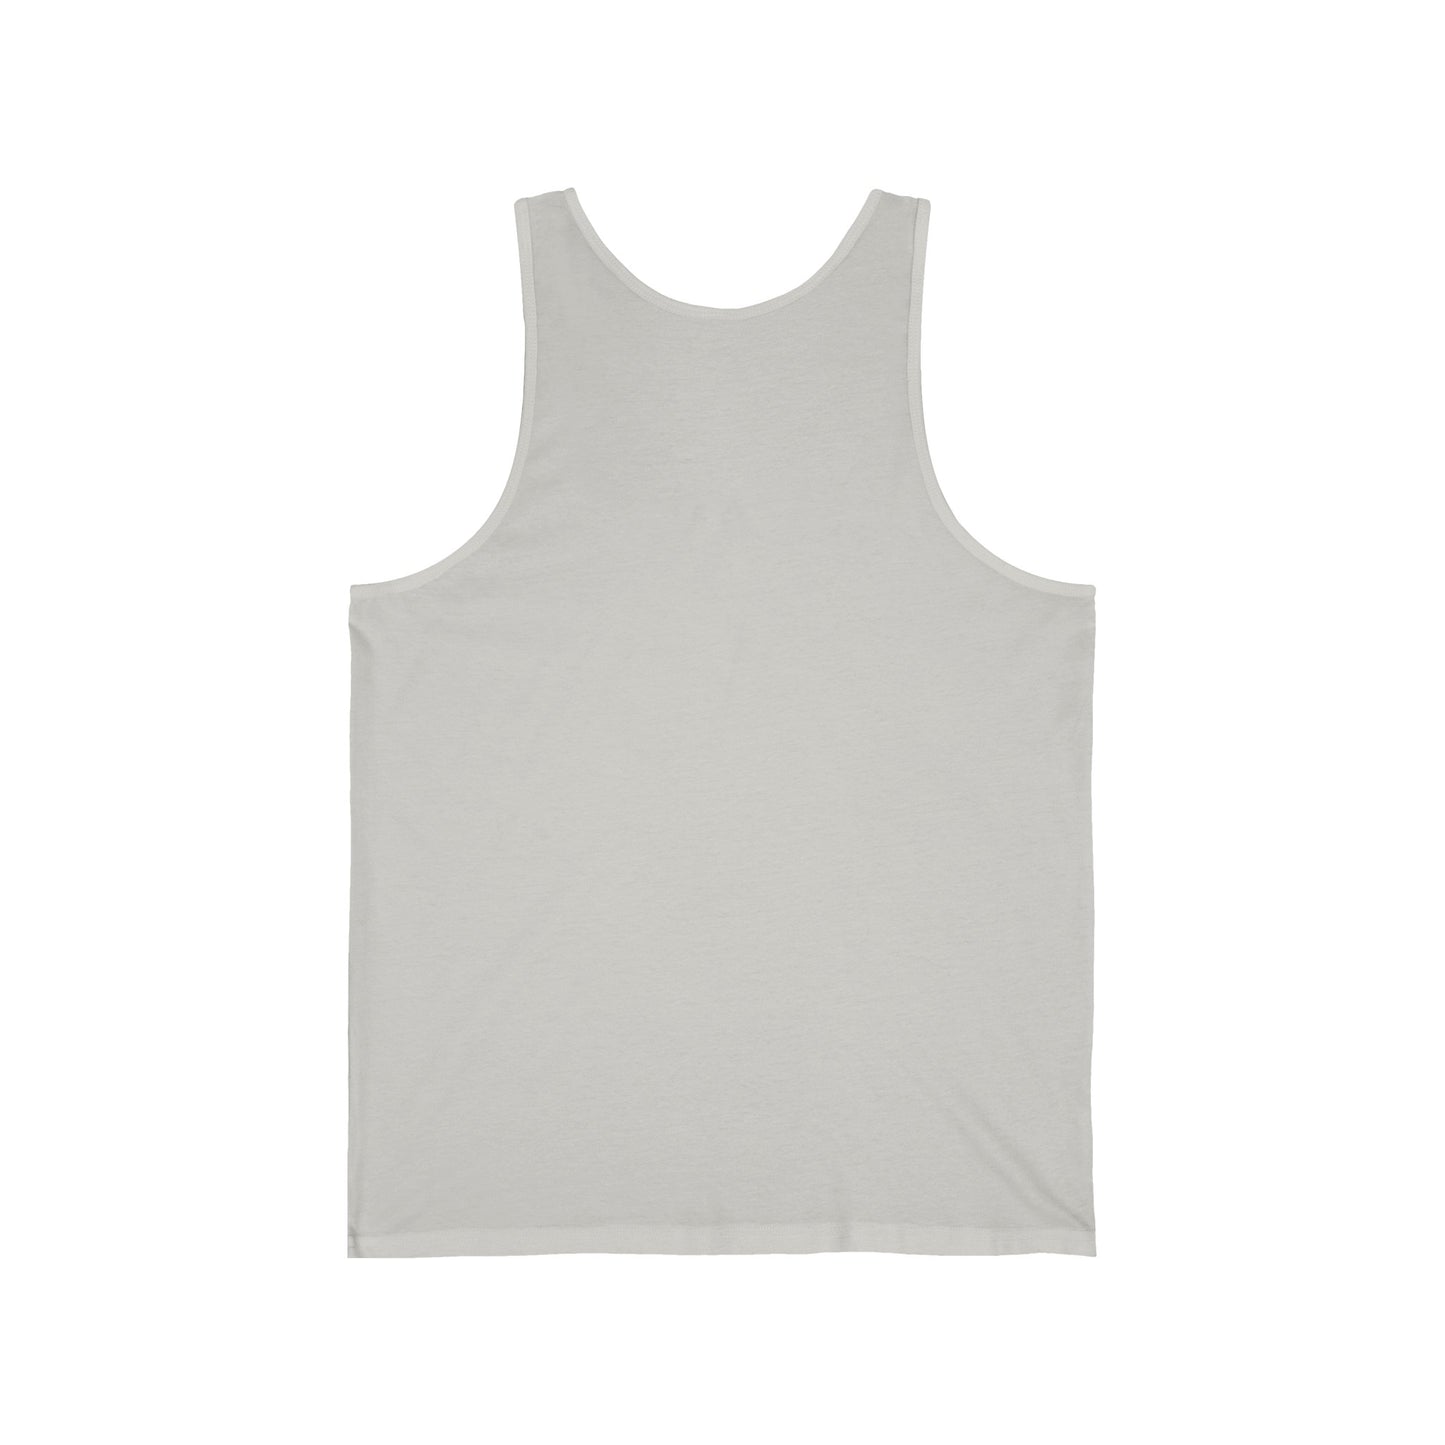 100% Airlume combed and ring-spun cotton Men & Women Tank Top Printed Sleevless Shirt for Casual